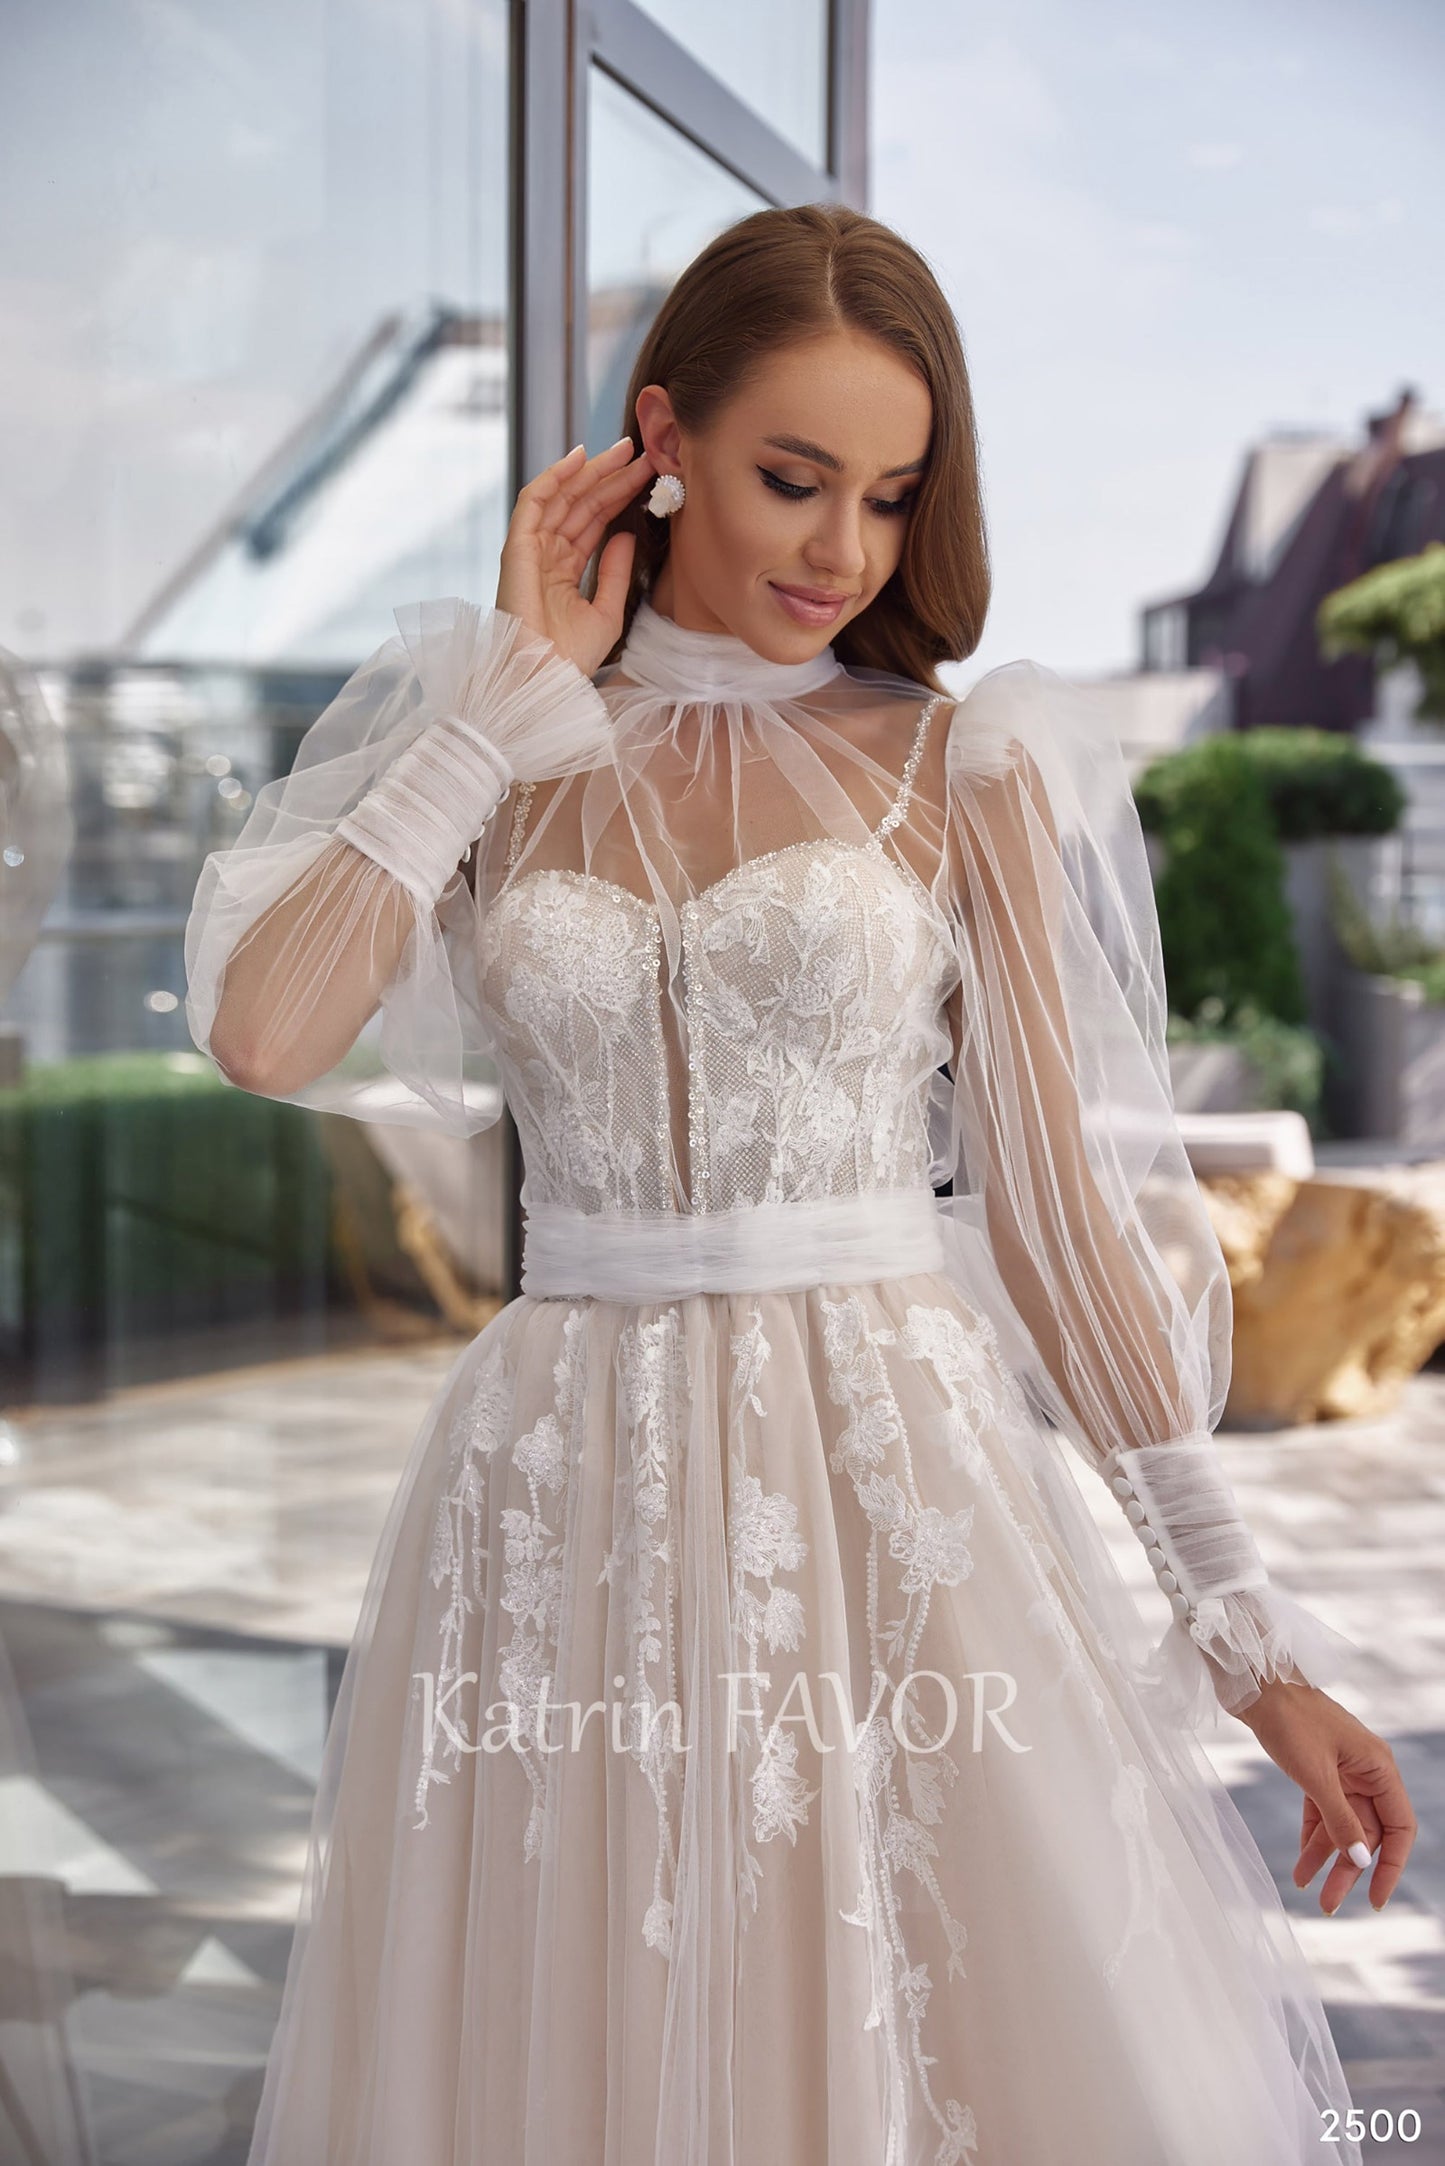 KatrinFAVORboutique-Fairy puff sleeve two piece wedding dress